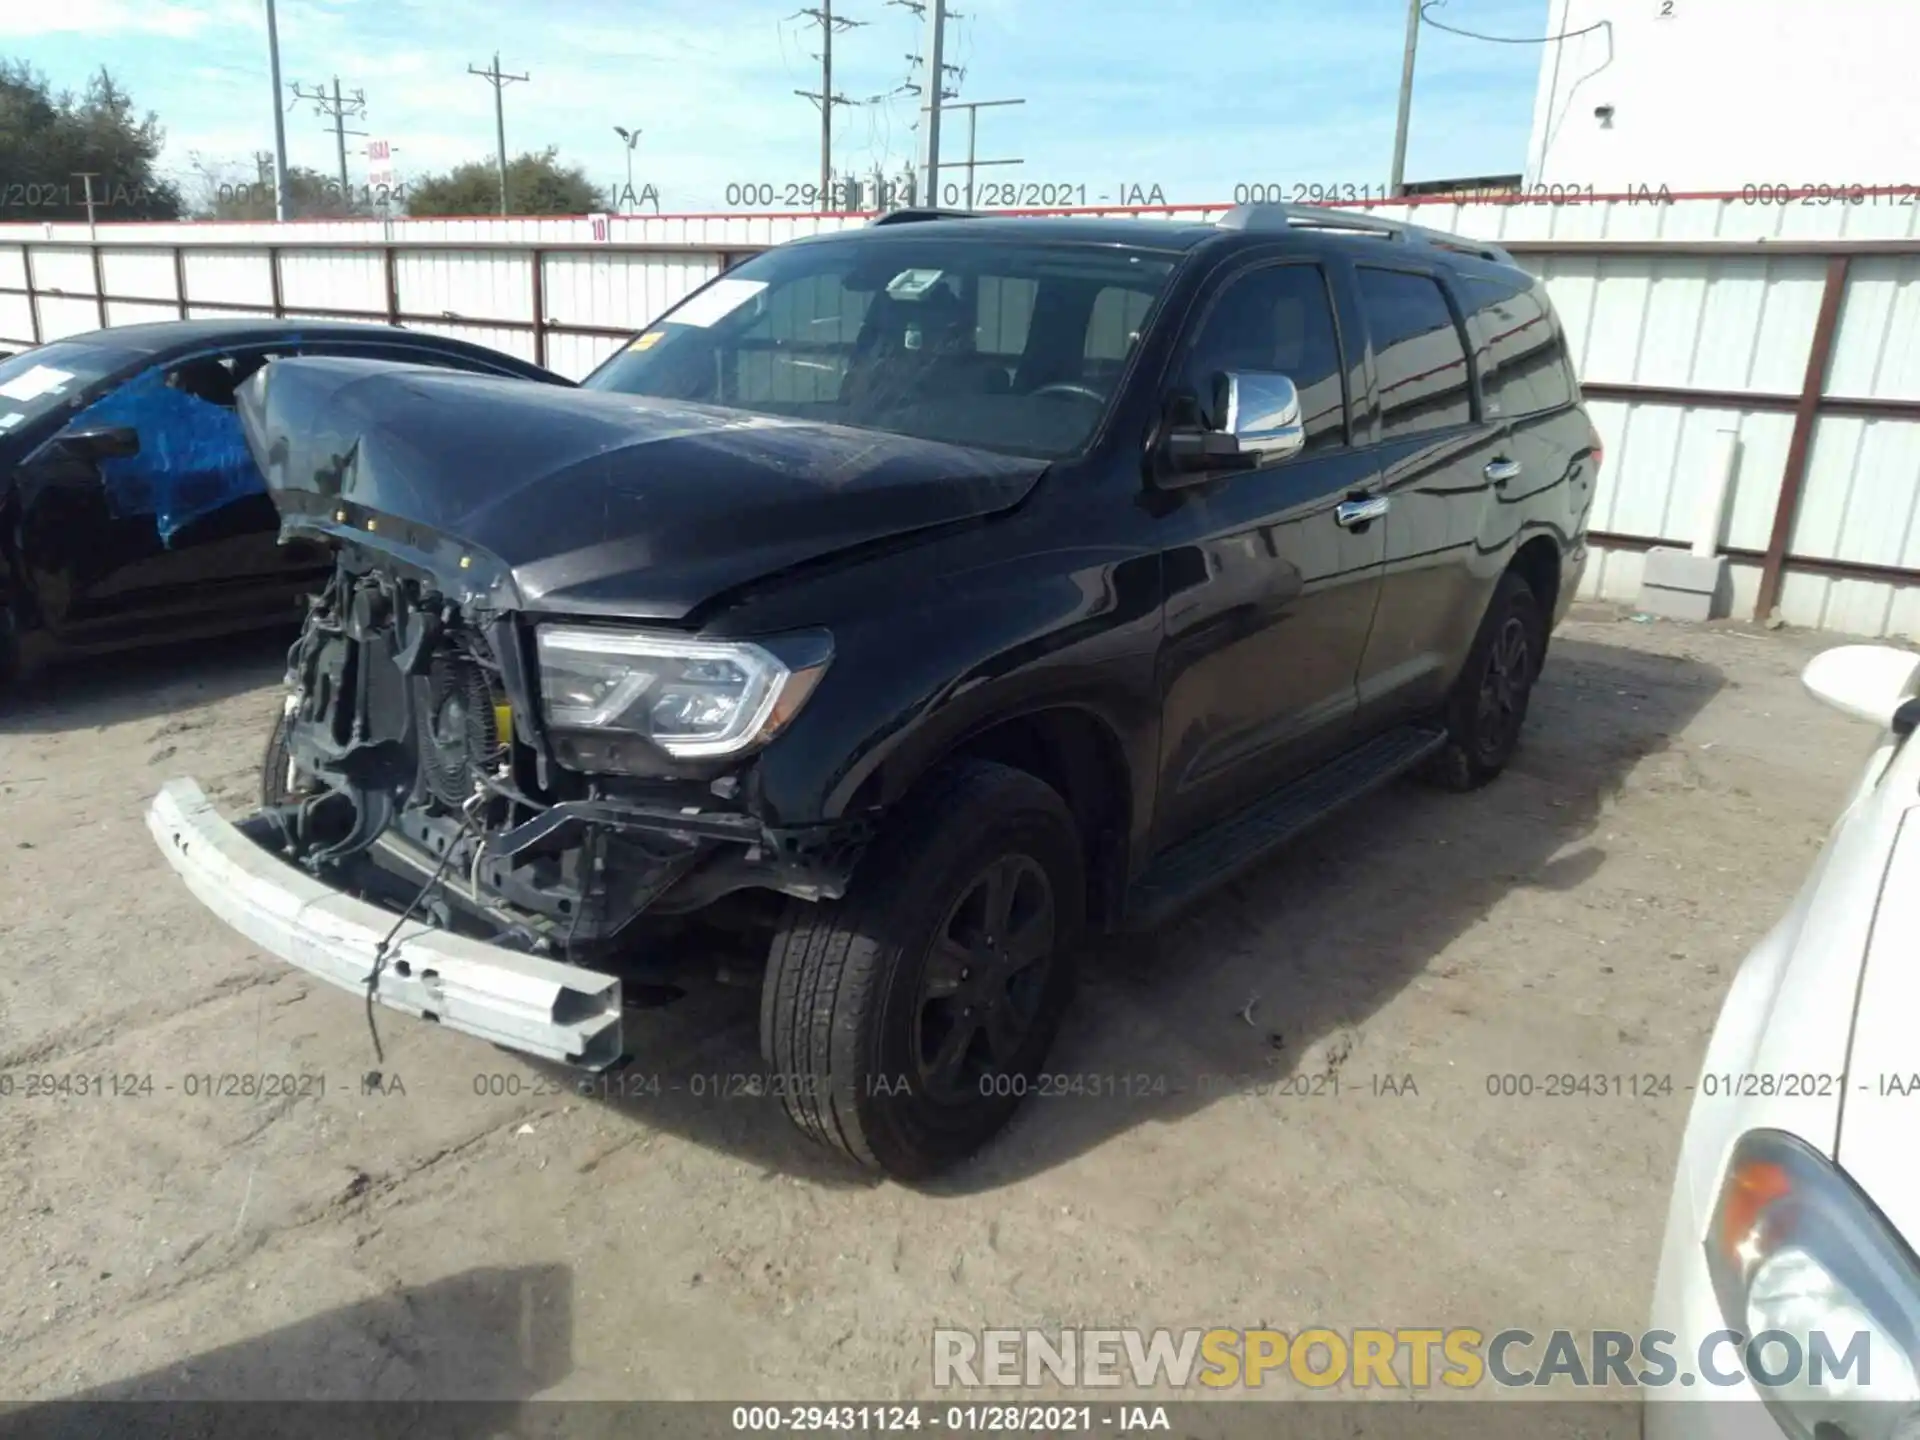 2 Photograph of a damaged car 5TDBY5G14KS168866 TOYOTA SEQUOIA 2019